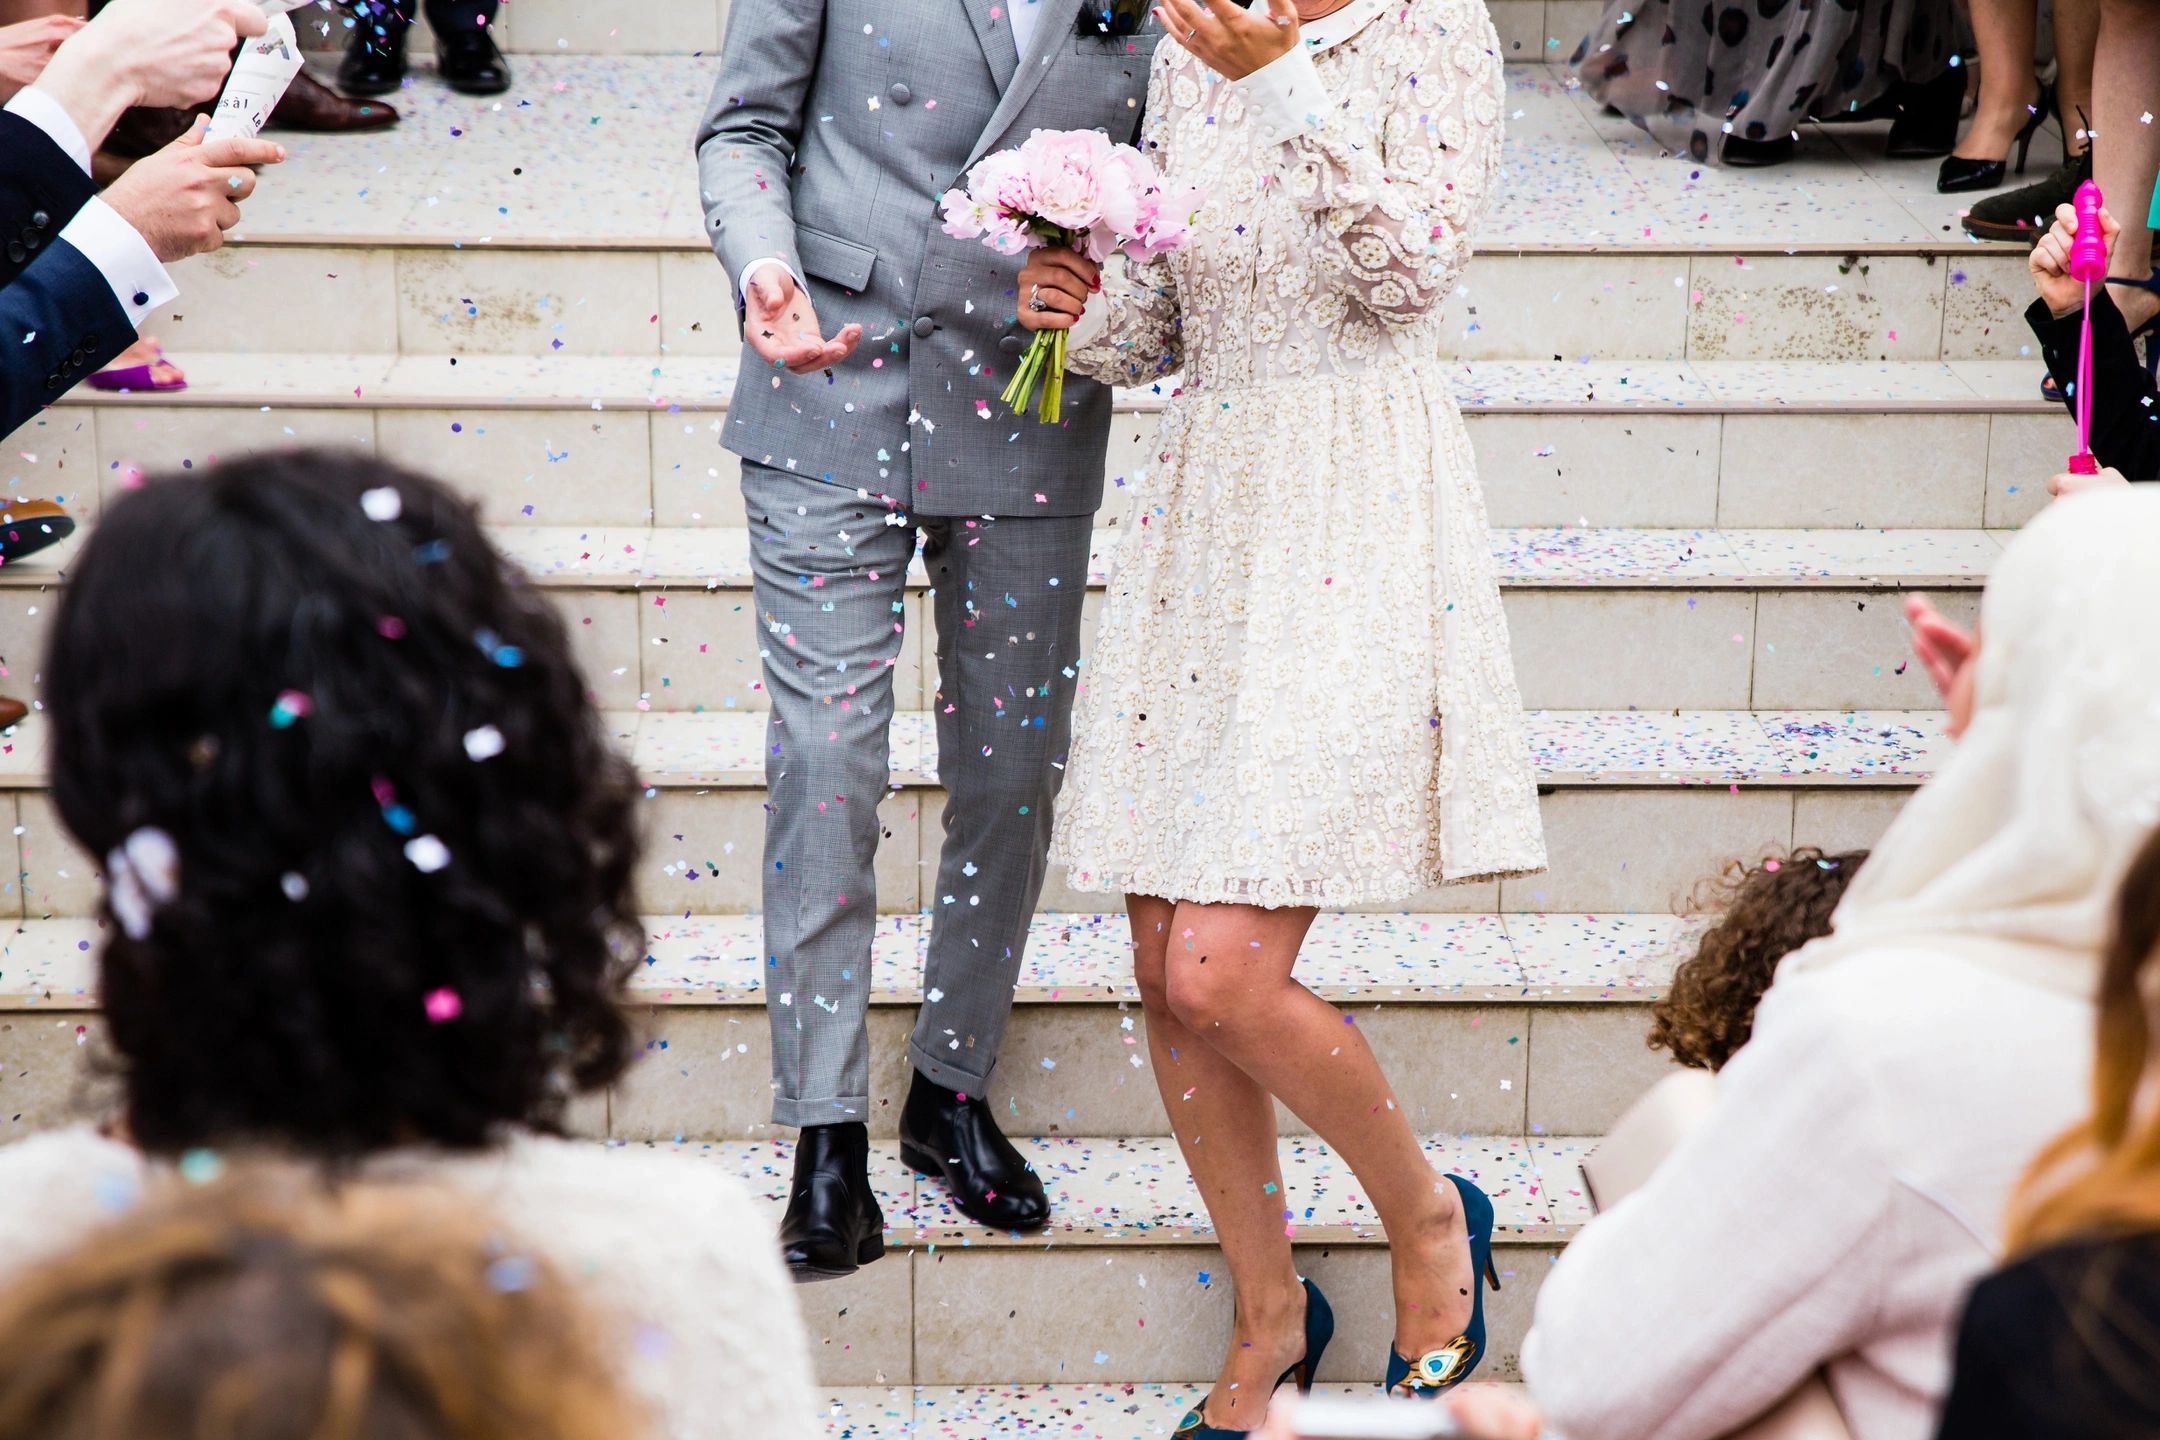 Event: Celebrating Wedding Vows with Confetti